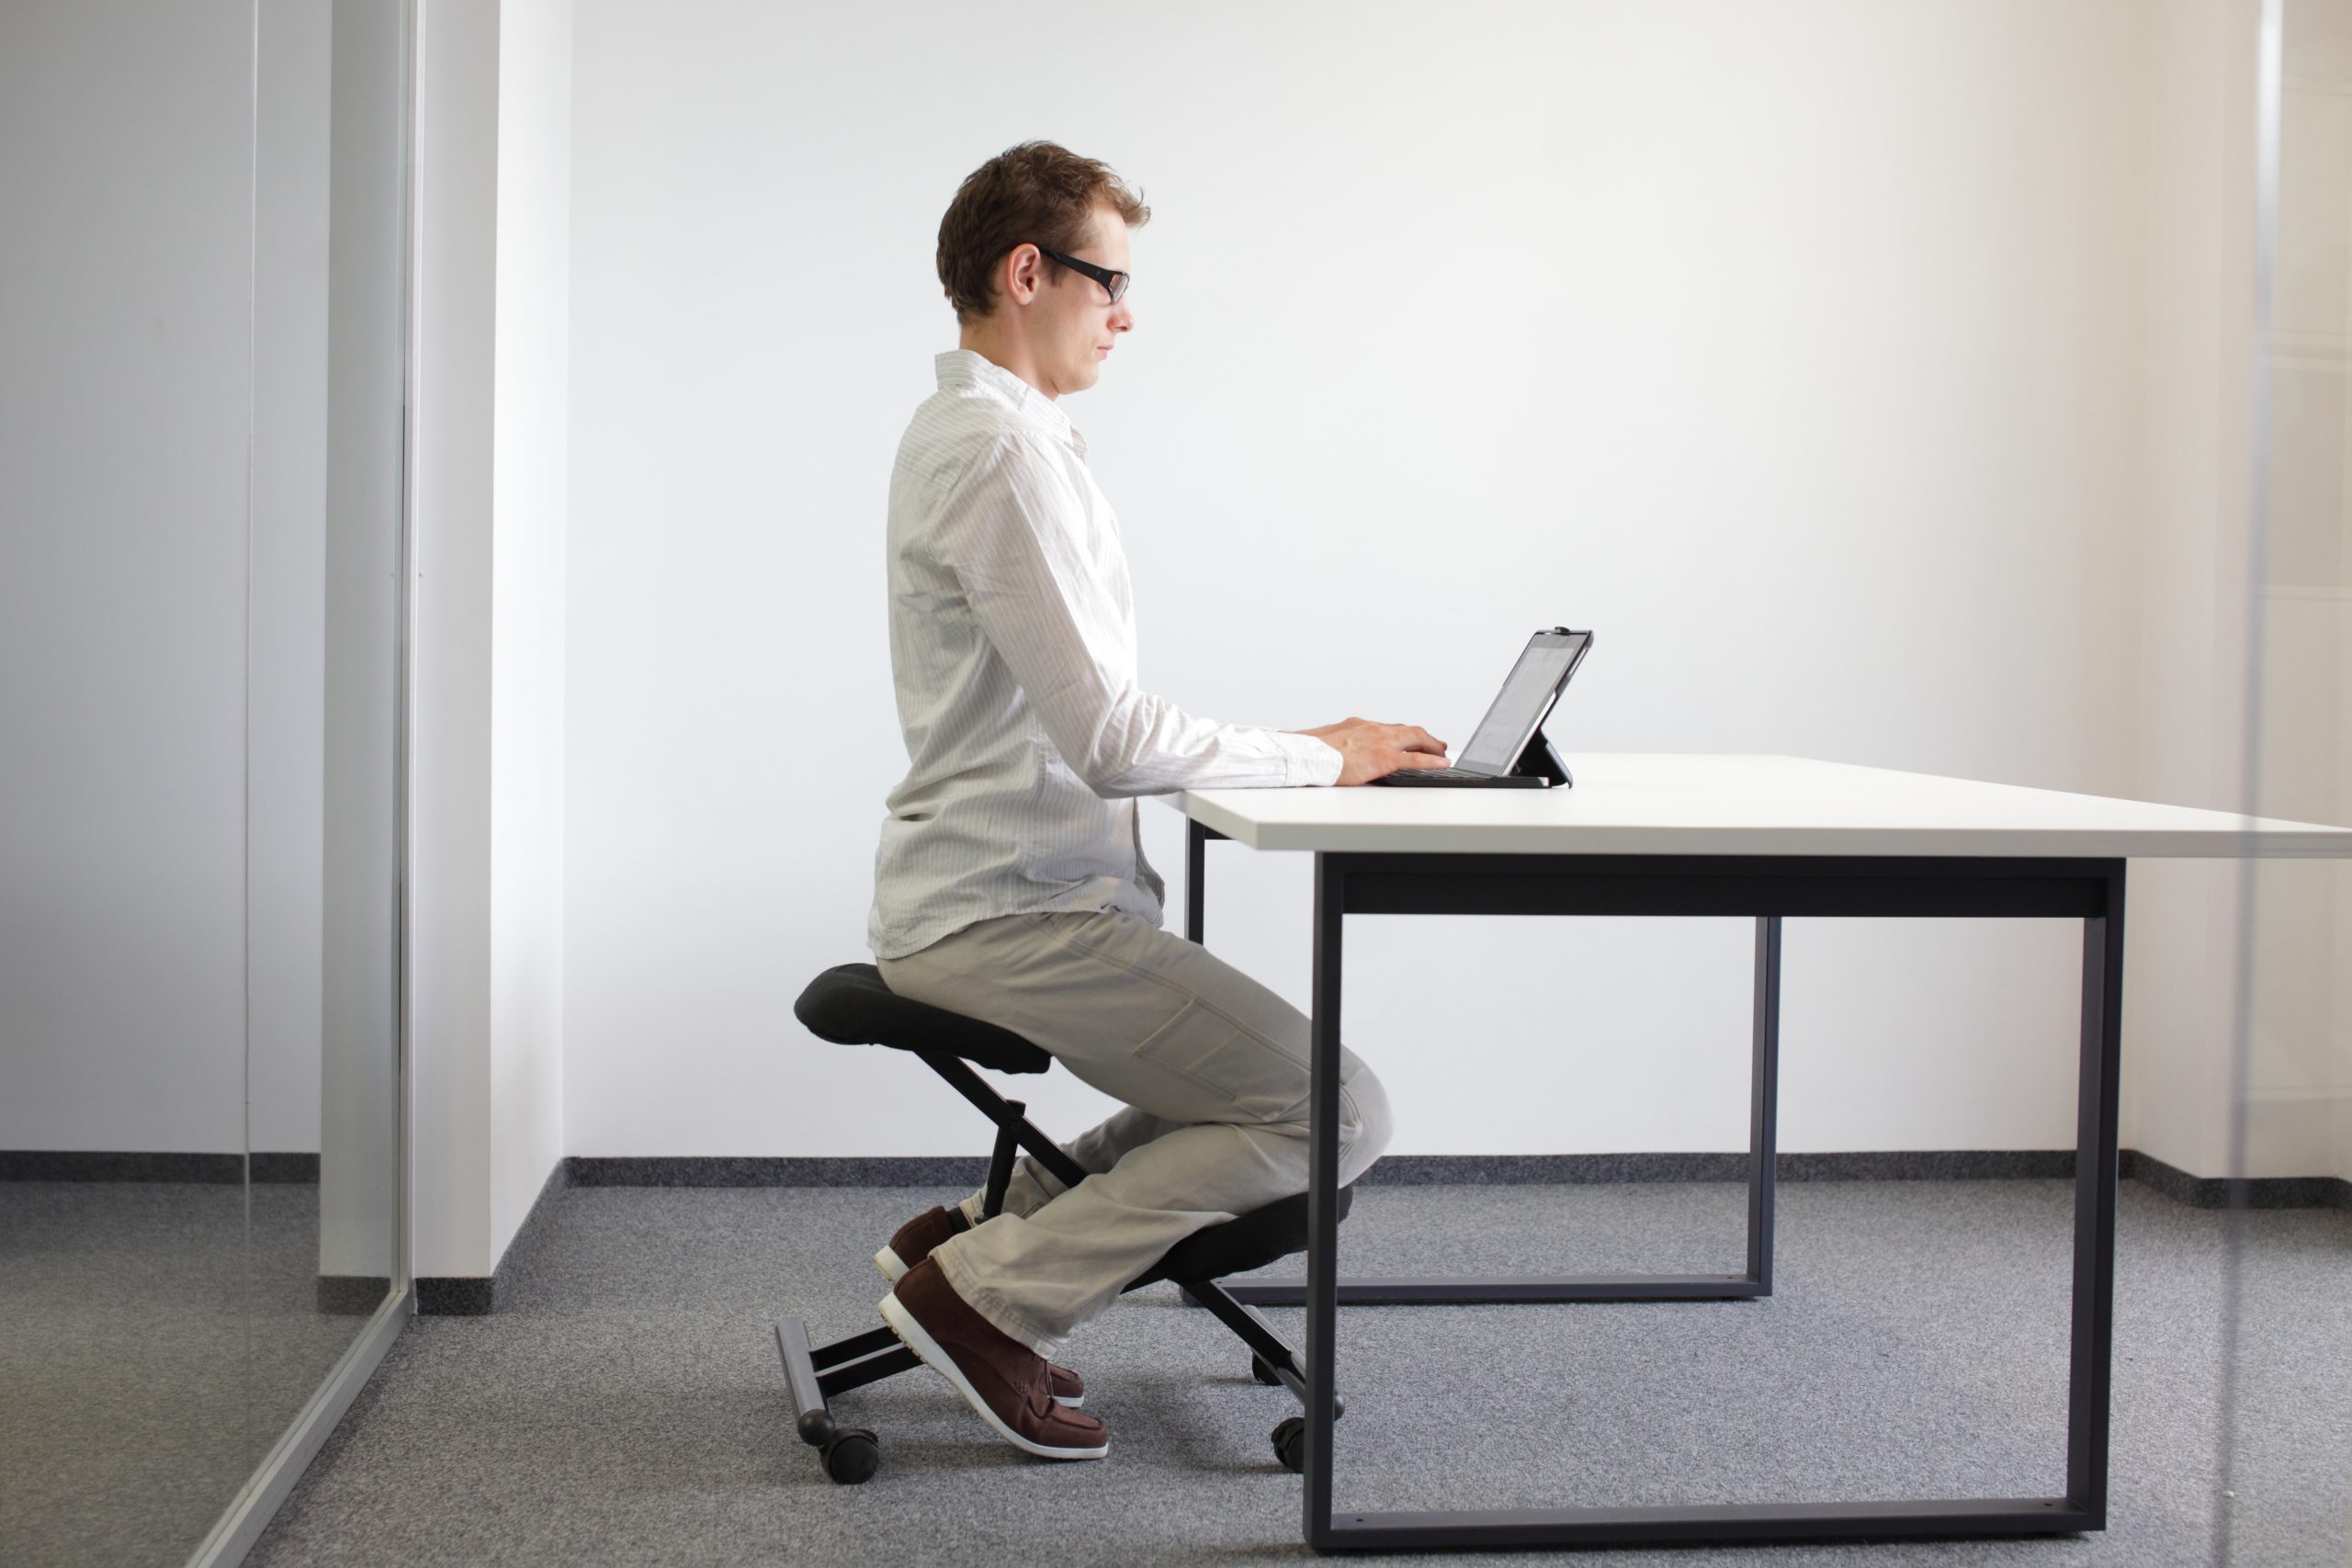  YOOMEMM Kneeling Chair,Ergonomic for Office with Wood